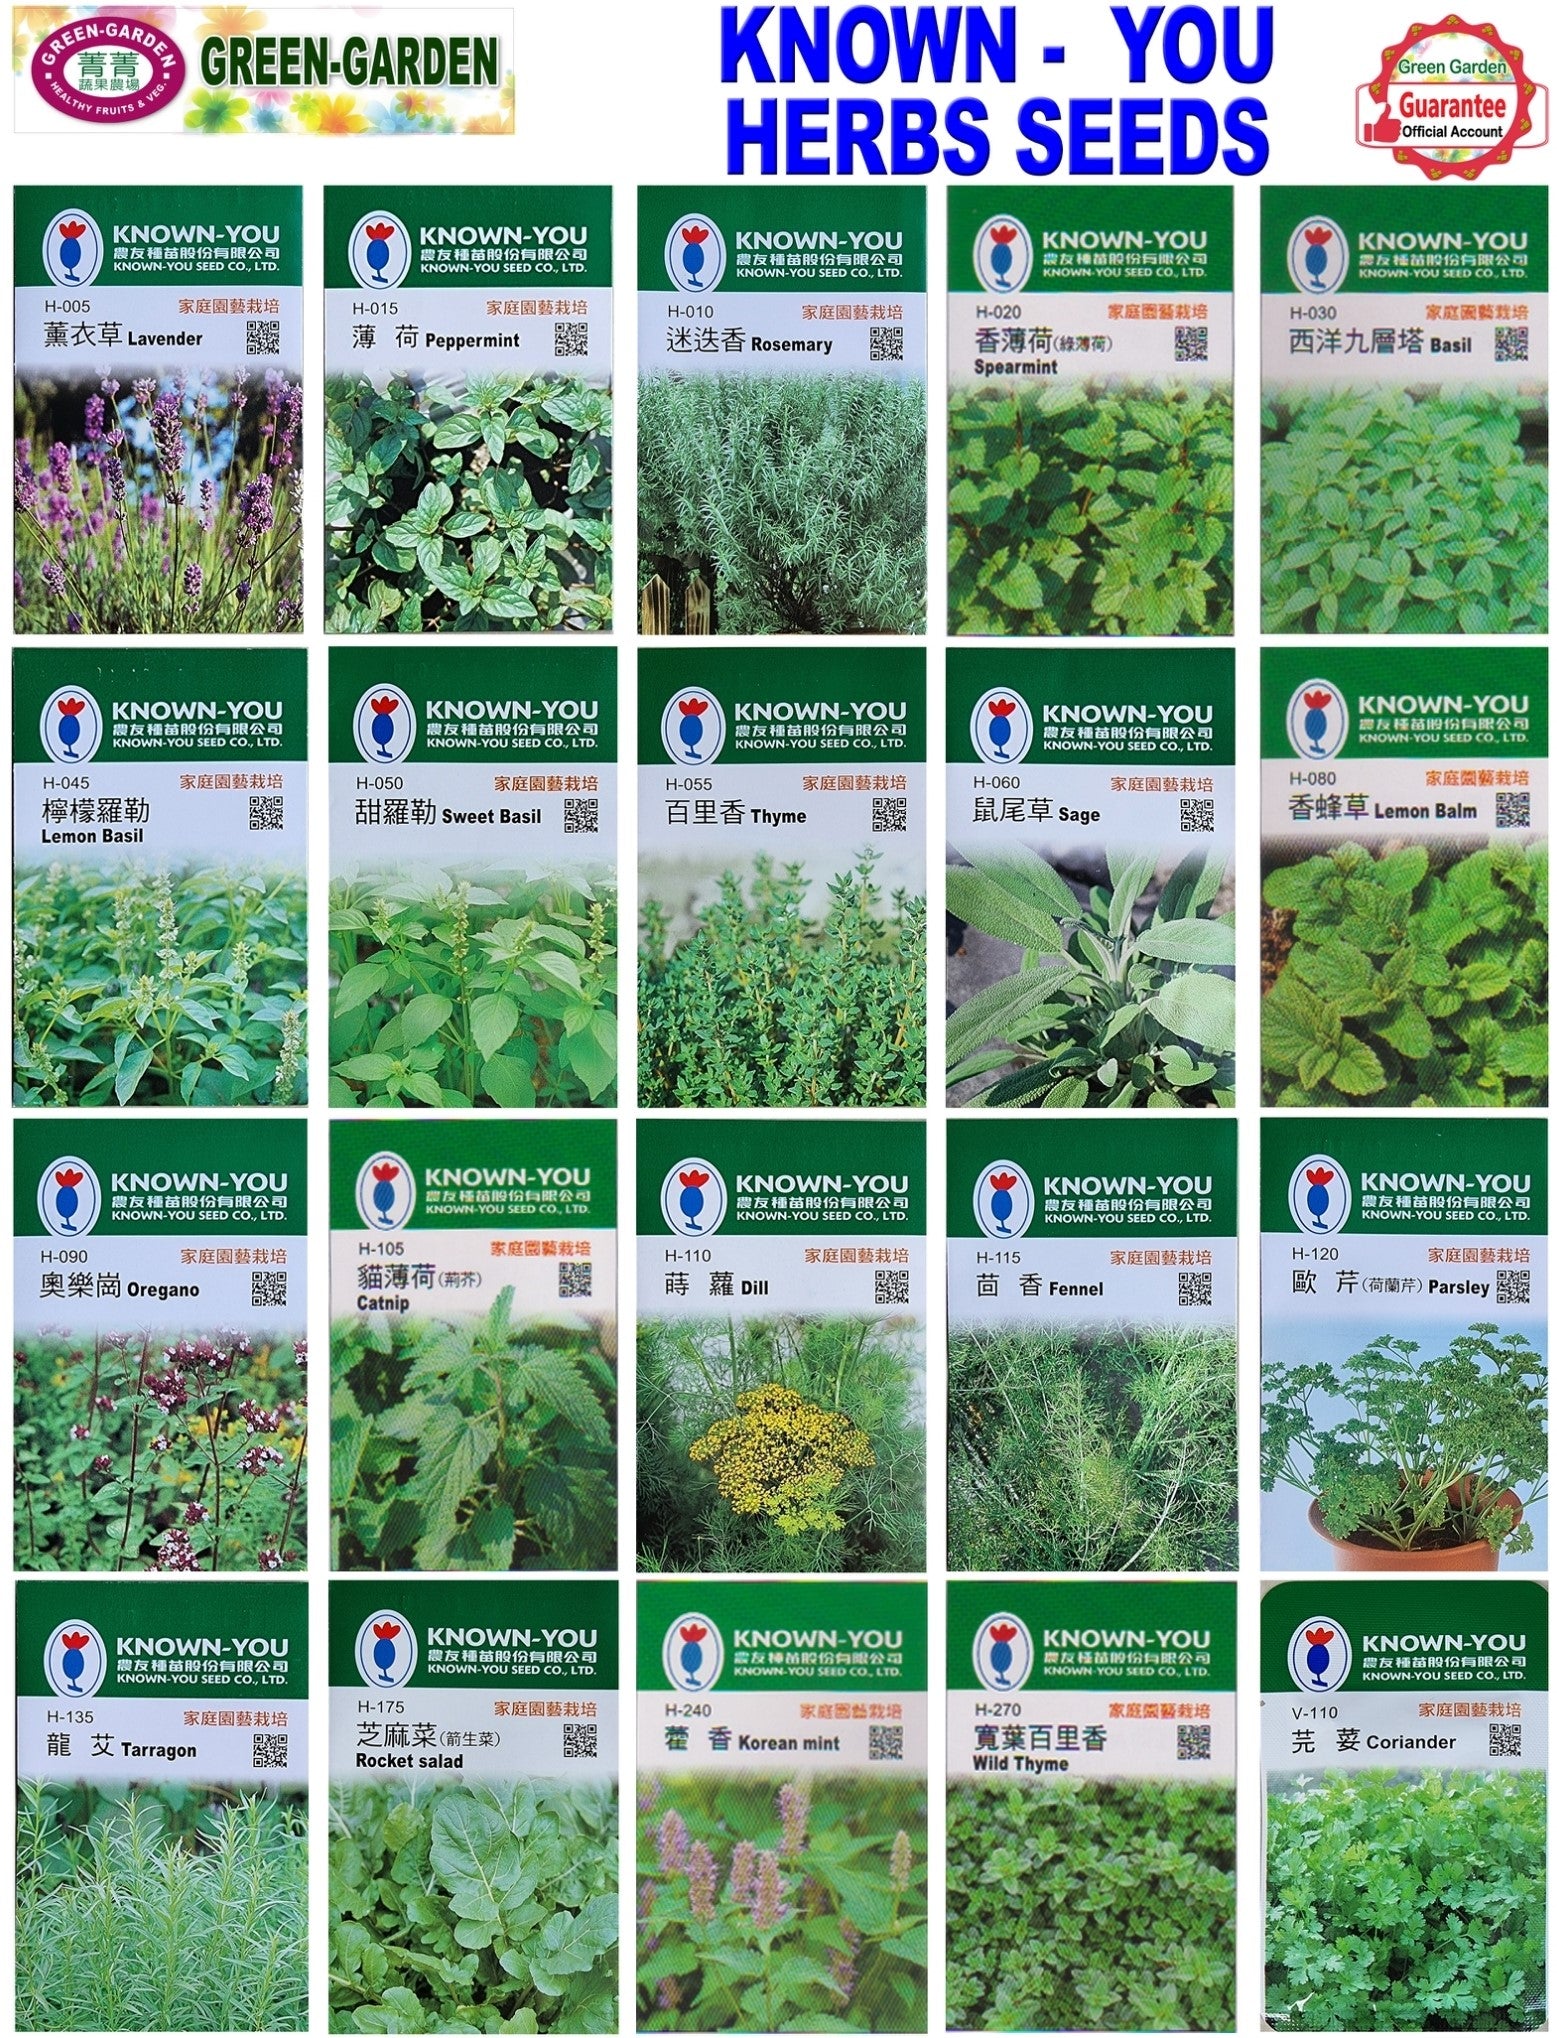 Known You Herbs Seeds (H-060 Sage)